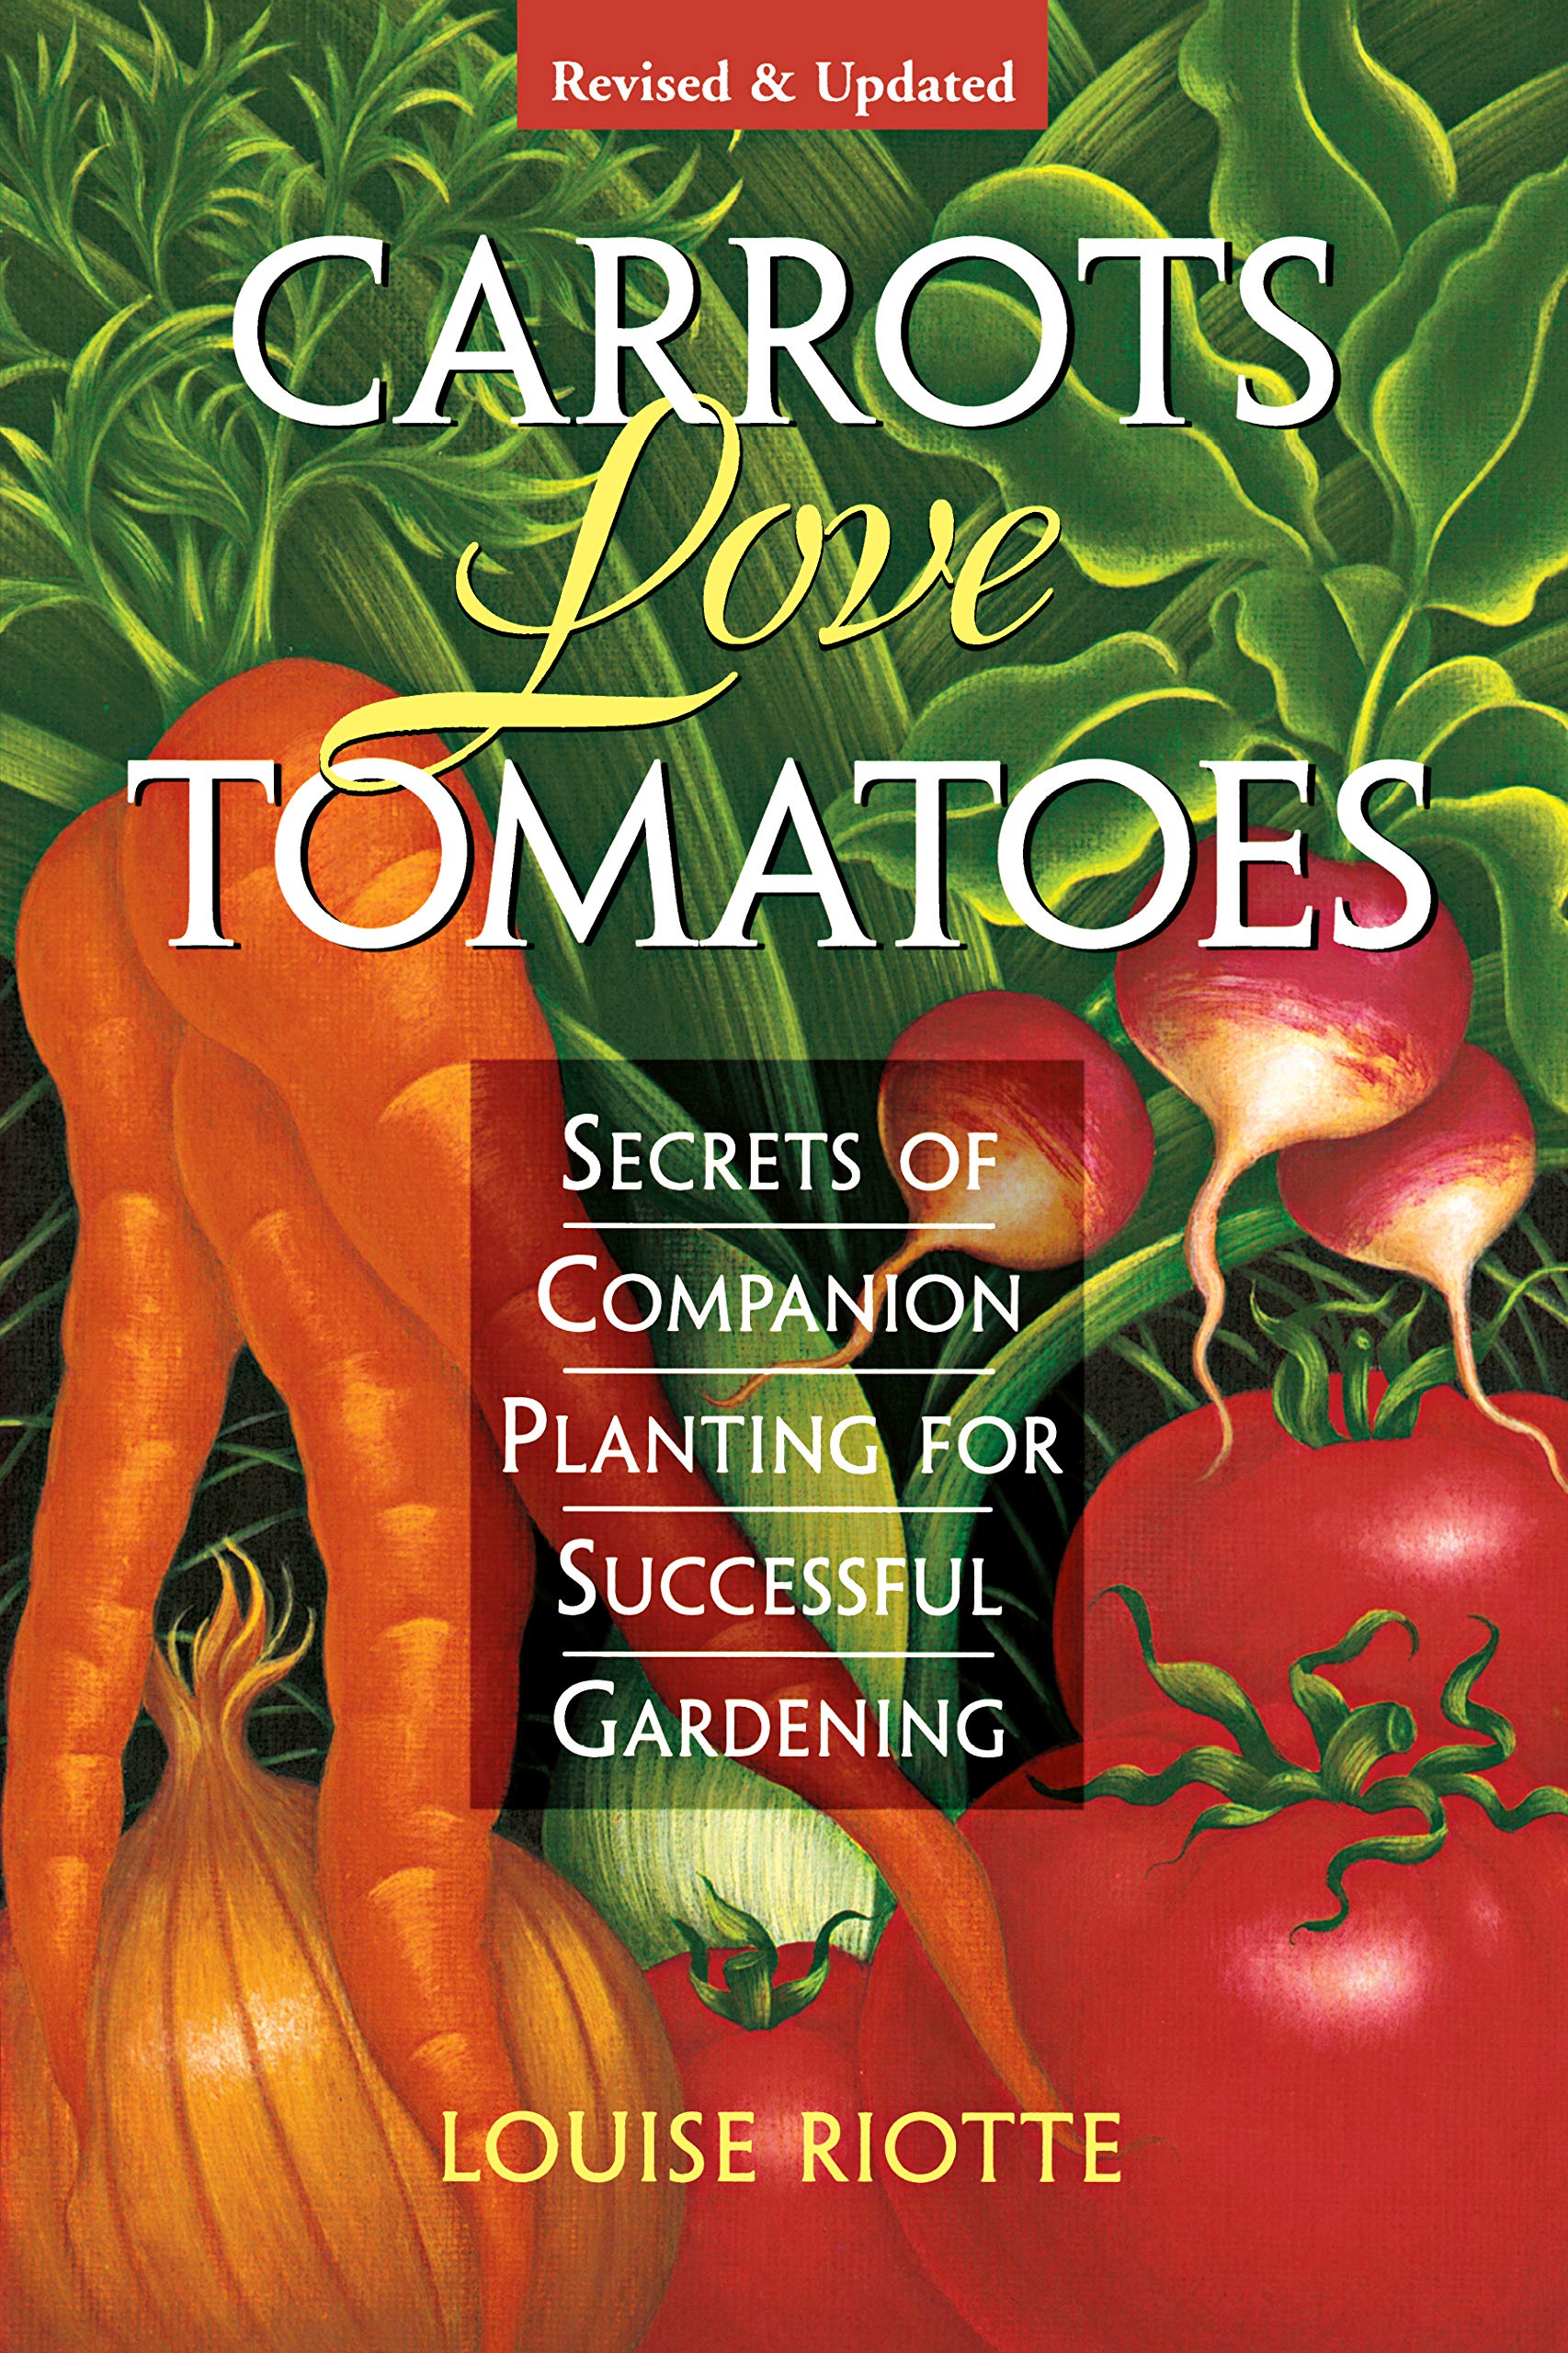 A cover of a book. The book is 'Carrots Love Tomatoes, Secrets of Companion Planting for Successful Gardening' by Lousie Riotte. These words are typeset over a background of colorful vegetables, including beets, onions, carrots, and tomatoes.